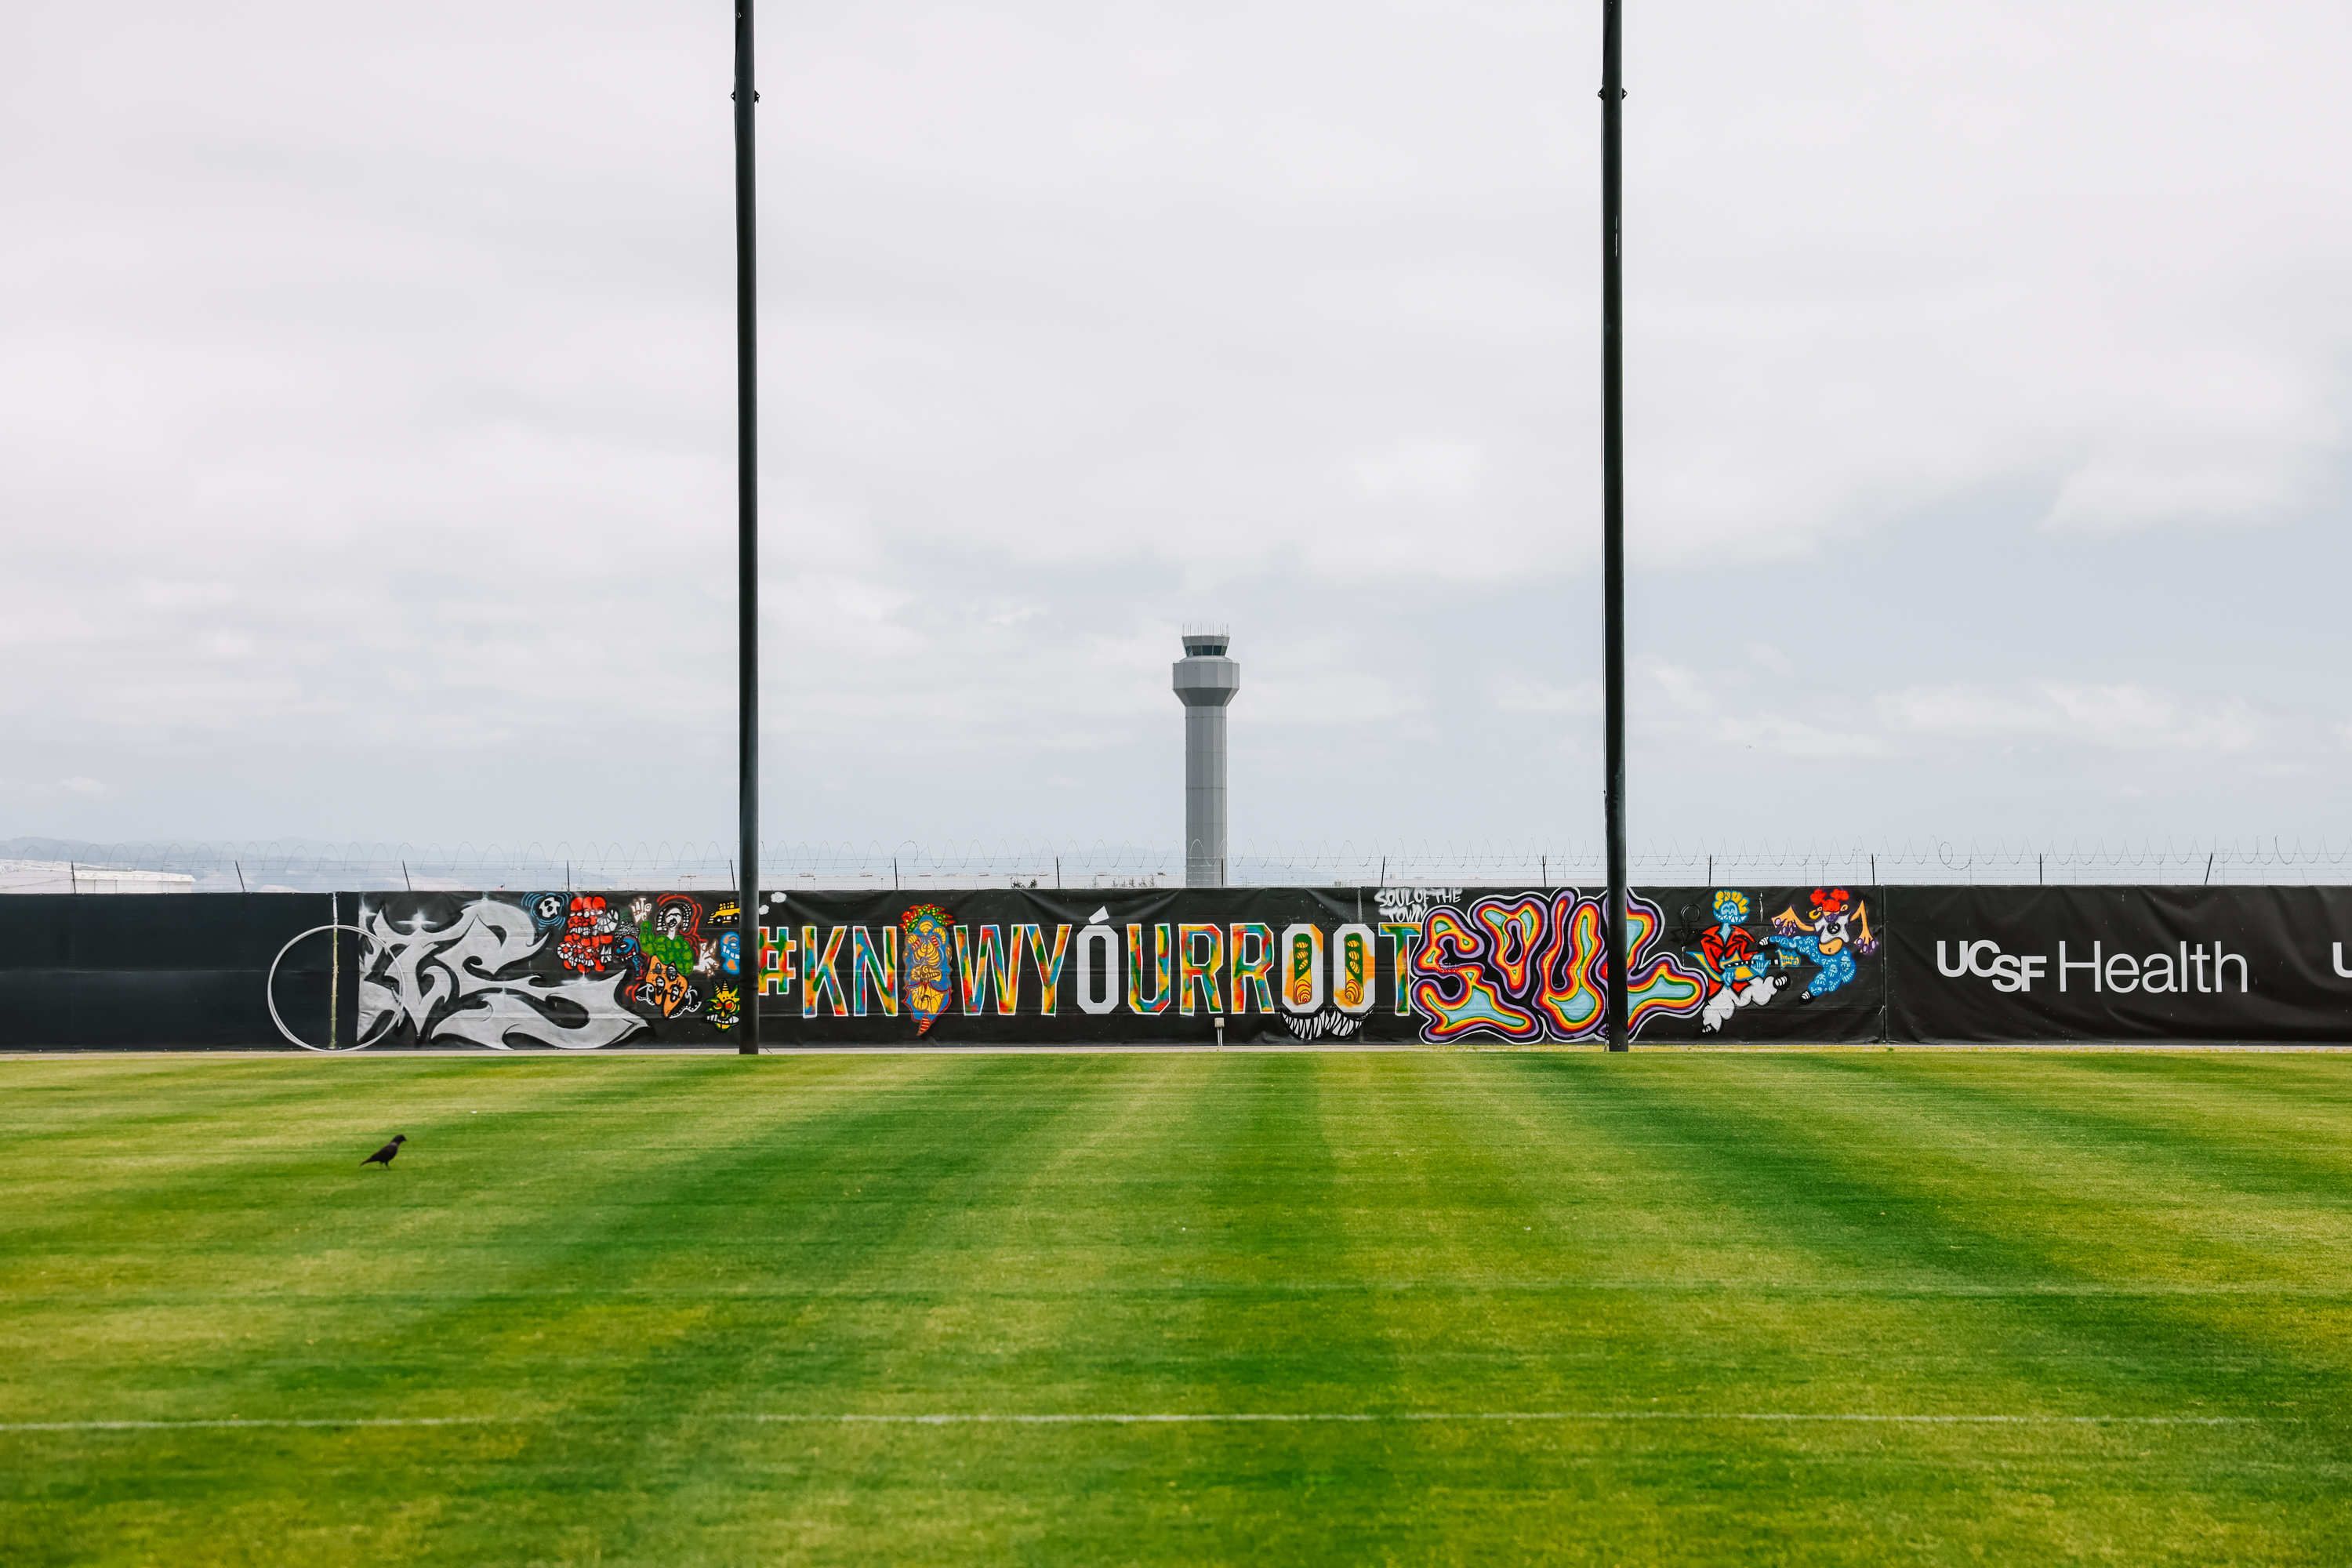 A grassy area with a colorful graffiti wall in the background, featuring the phrase &quot;#KNOWYOURROOTS&quot;, near an airport tower.